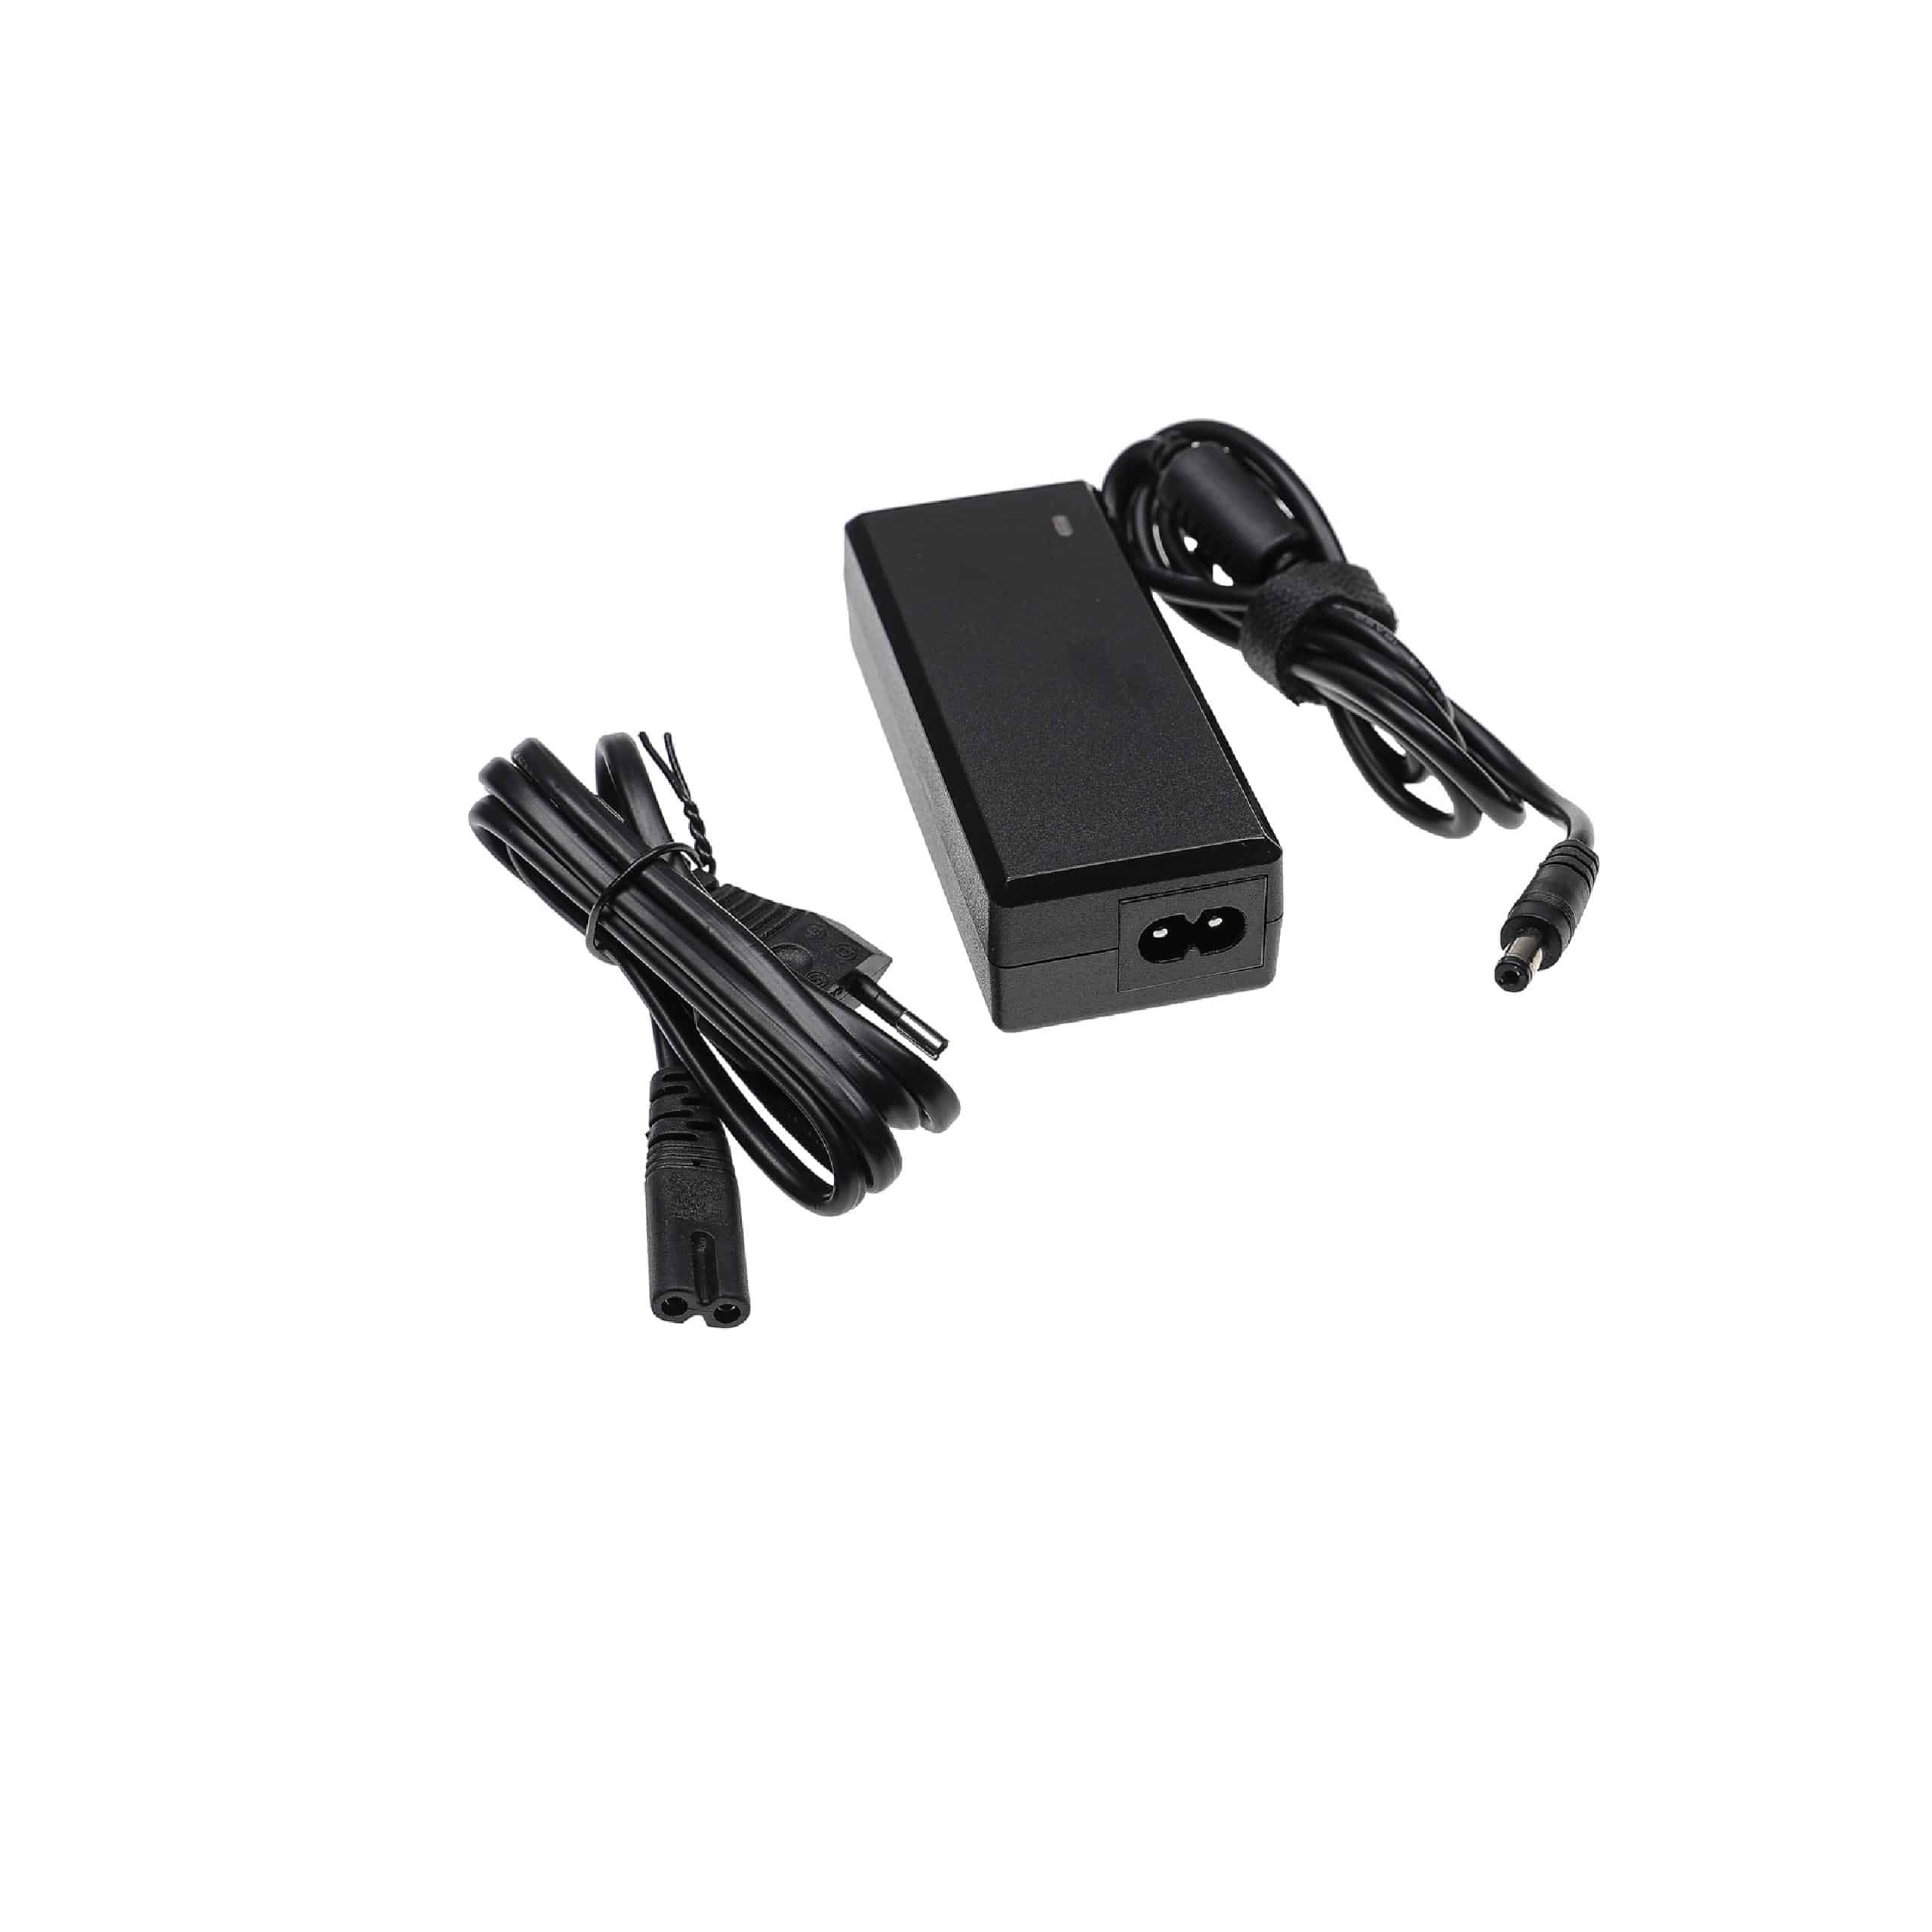 Mains Power Adapter replaces Brother PA-AD-600 for Printer